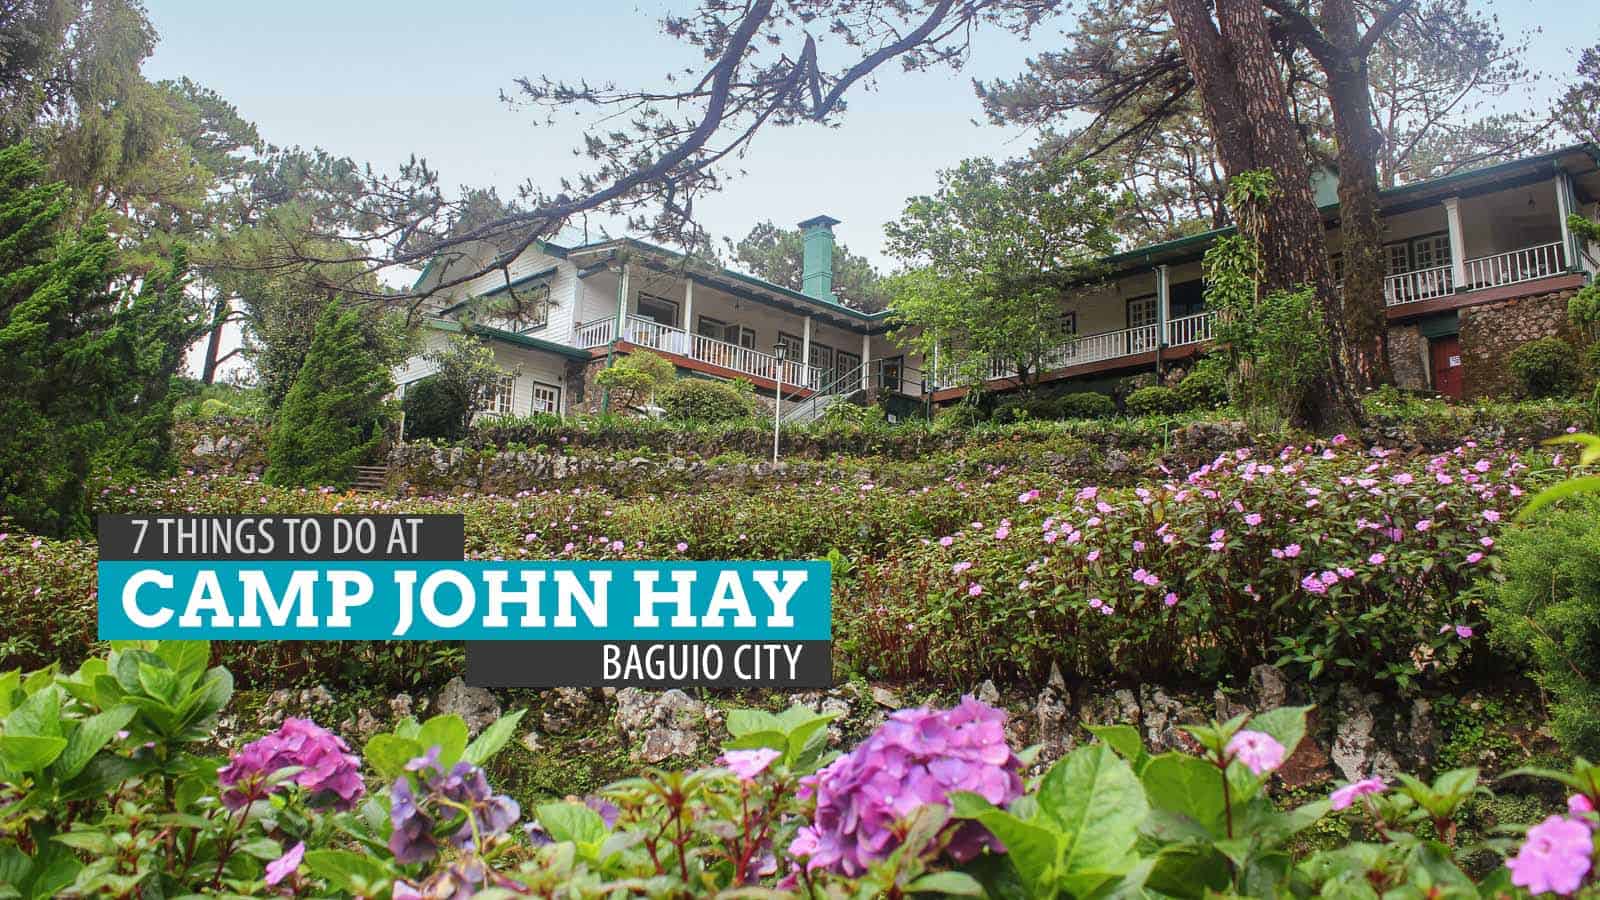 7 Things To Do At Camp John Hay Baguio City The Poor Traveler Itinerary Blog